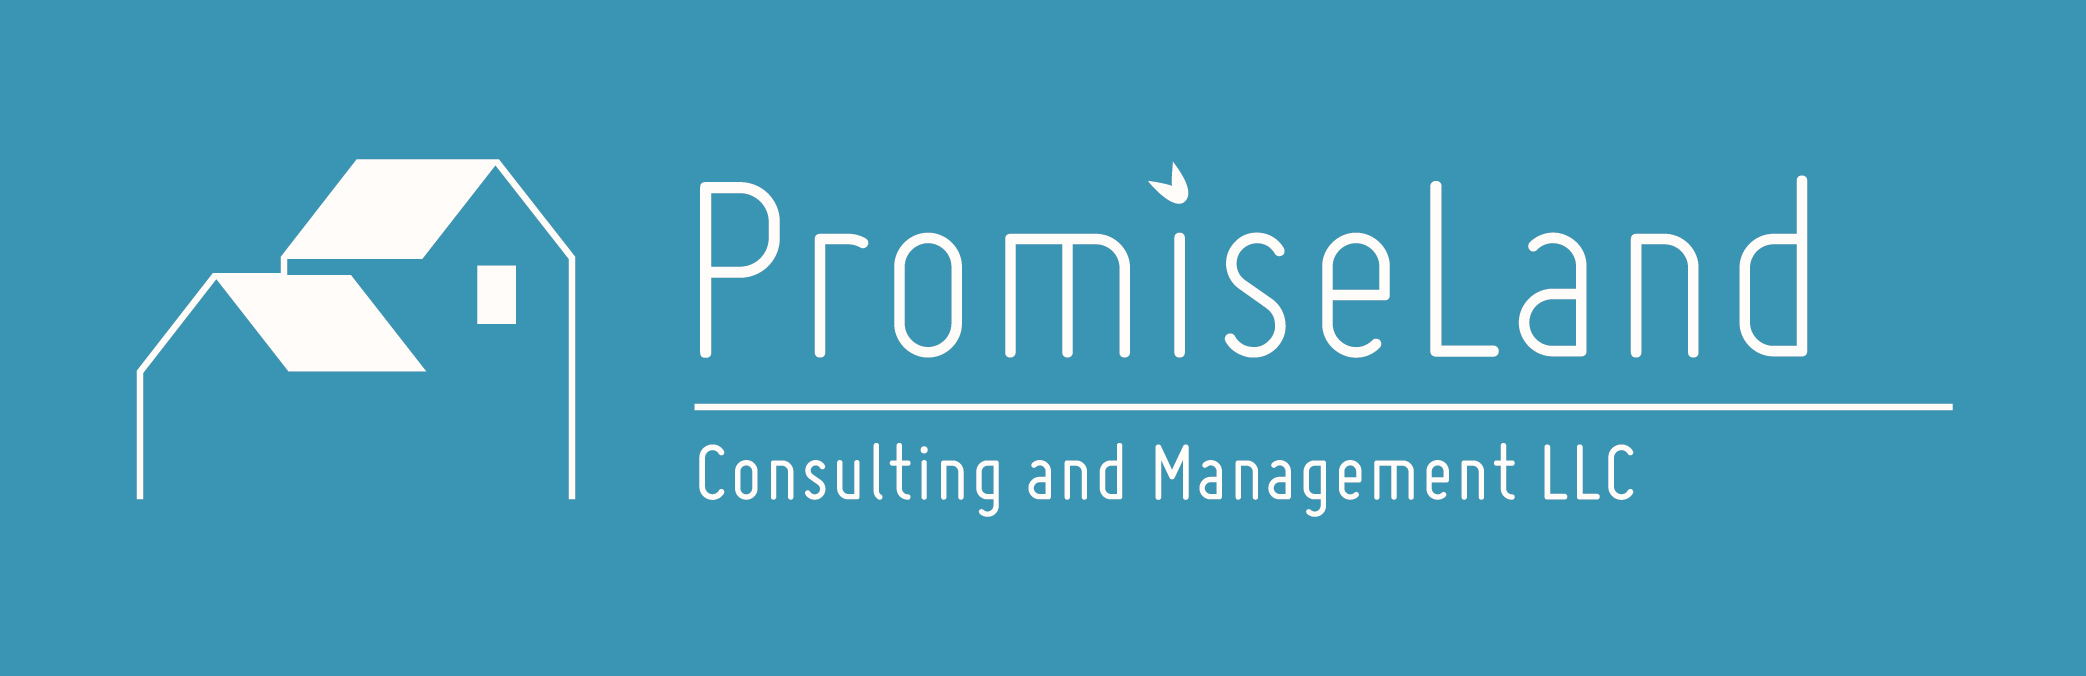 PromiseLand Consulting and Management LLC